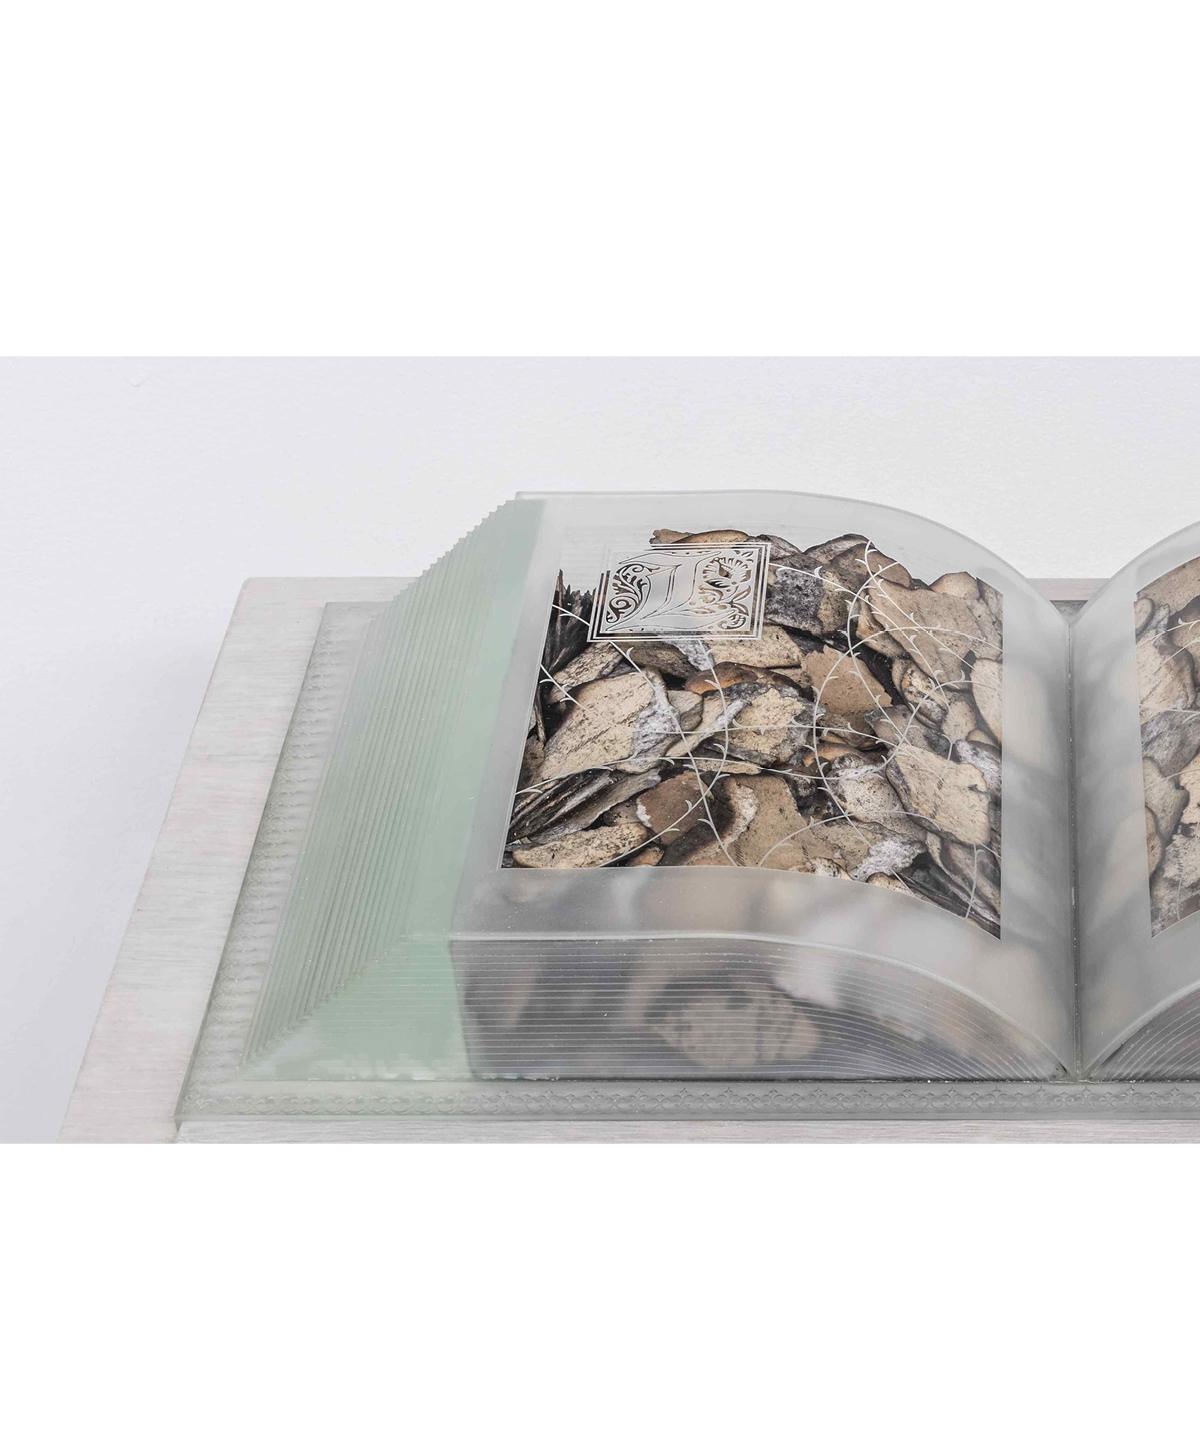 A clear plastic book is spread open, with what appears to be shavings of beige, brown, and grey rock embedded under the pages. At the top left of the page is a clear embossed letter L.